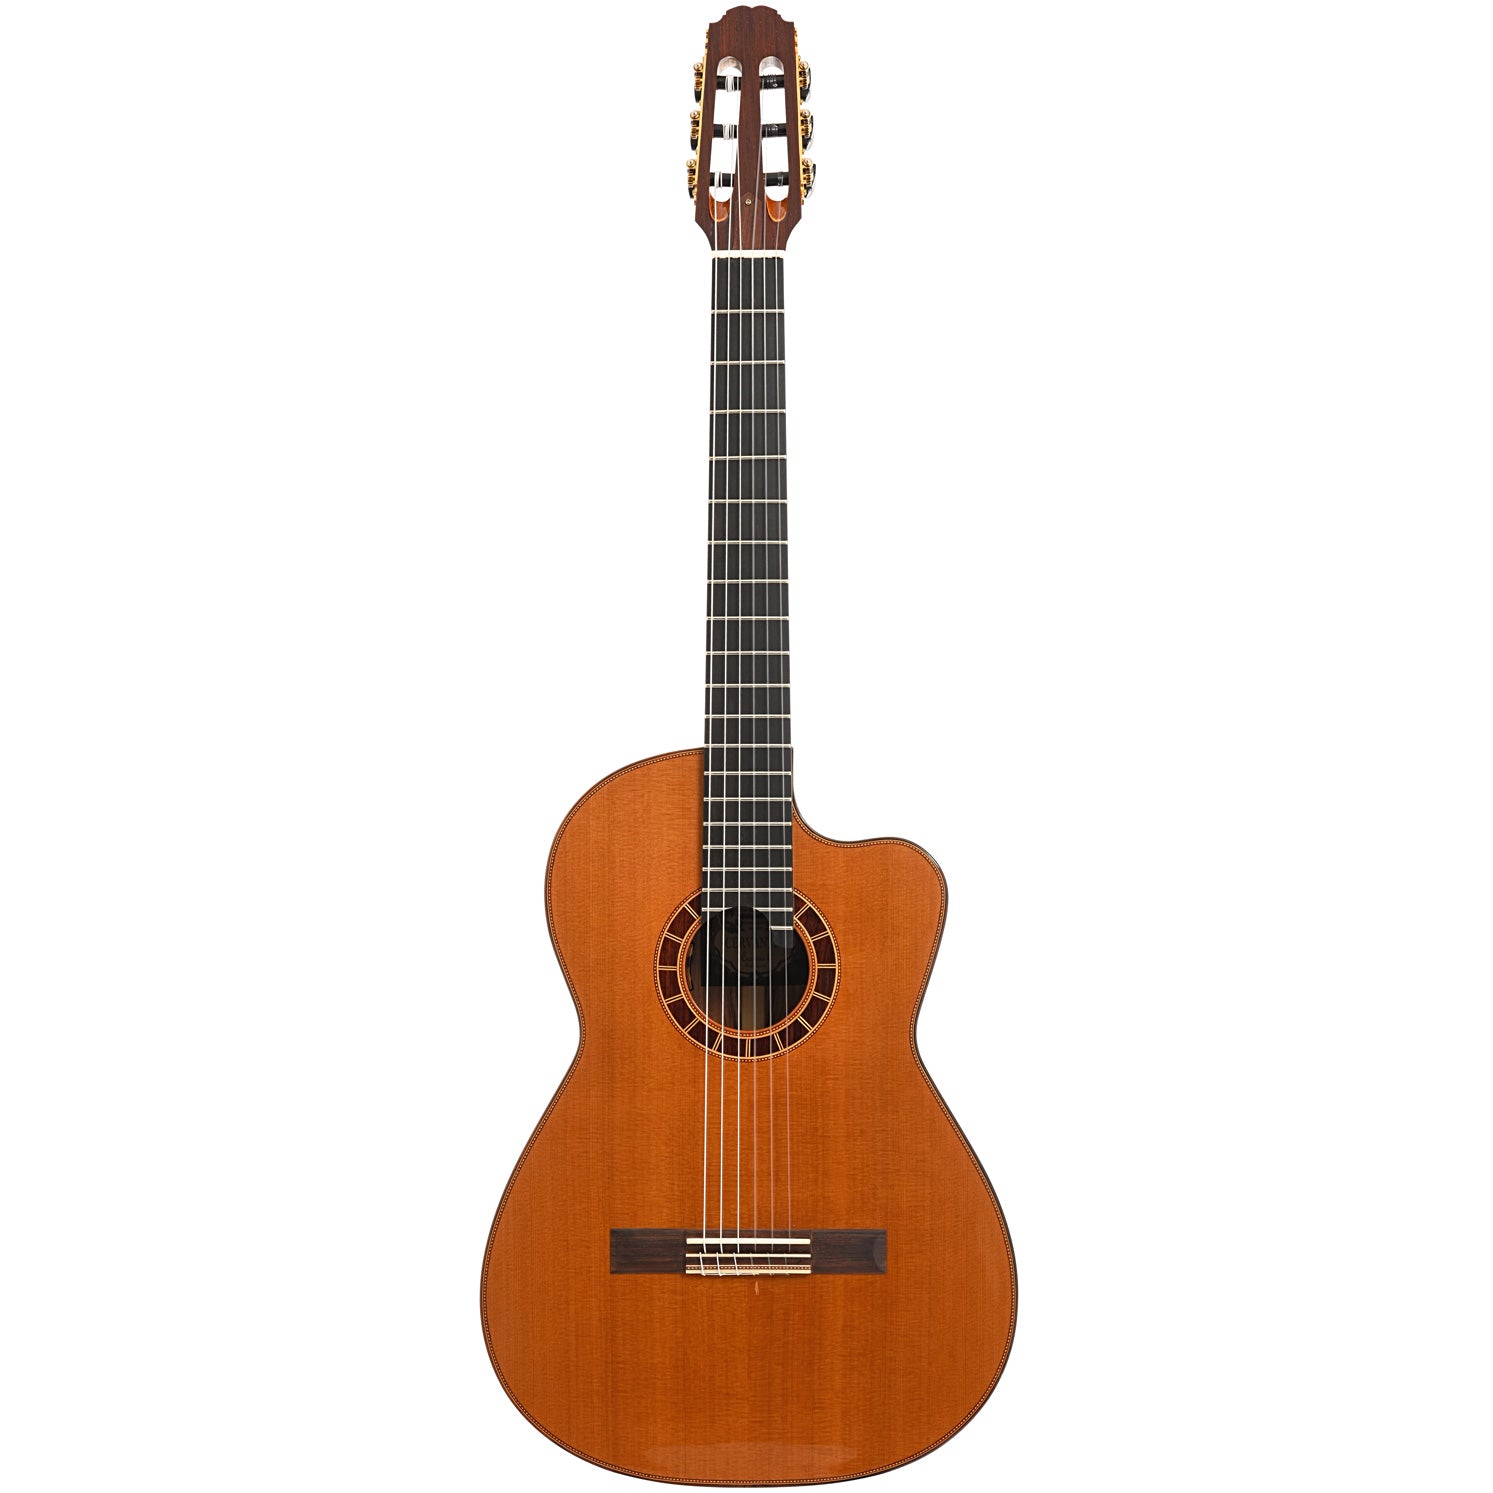 Full front of Cervantes Crossover 1 Classical Guitar